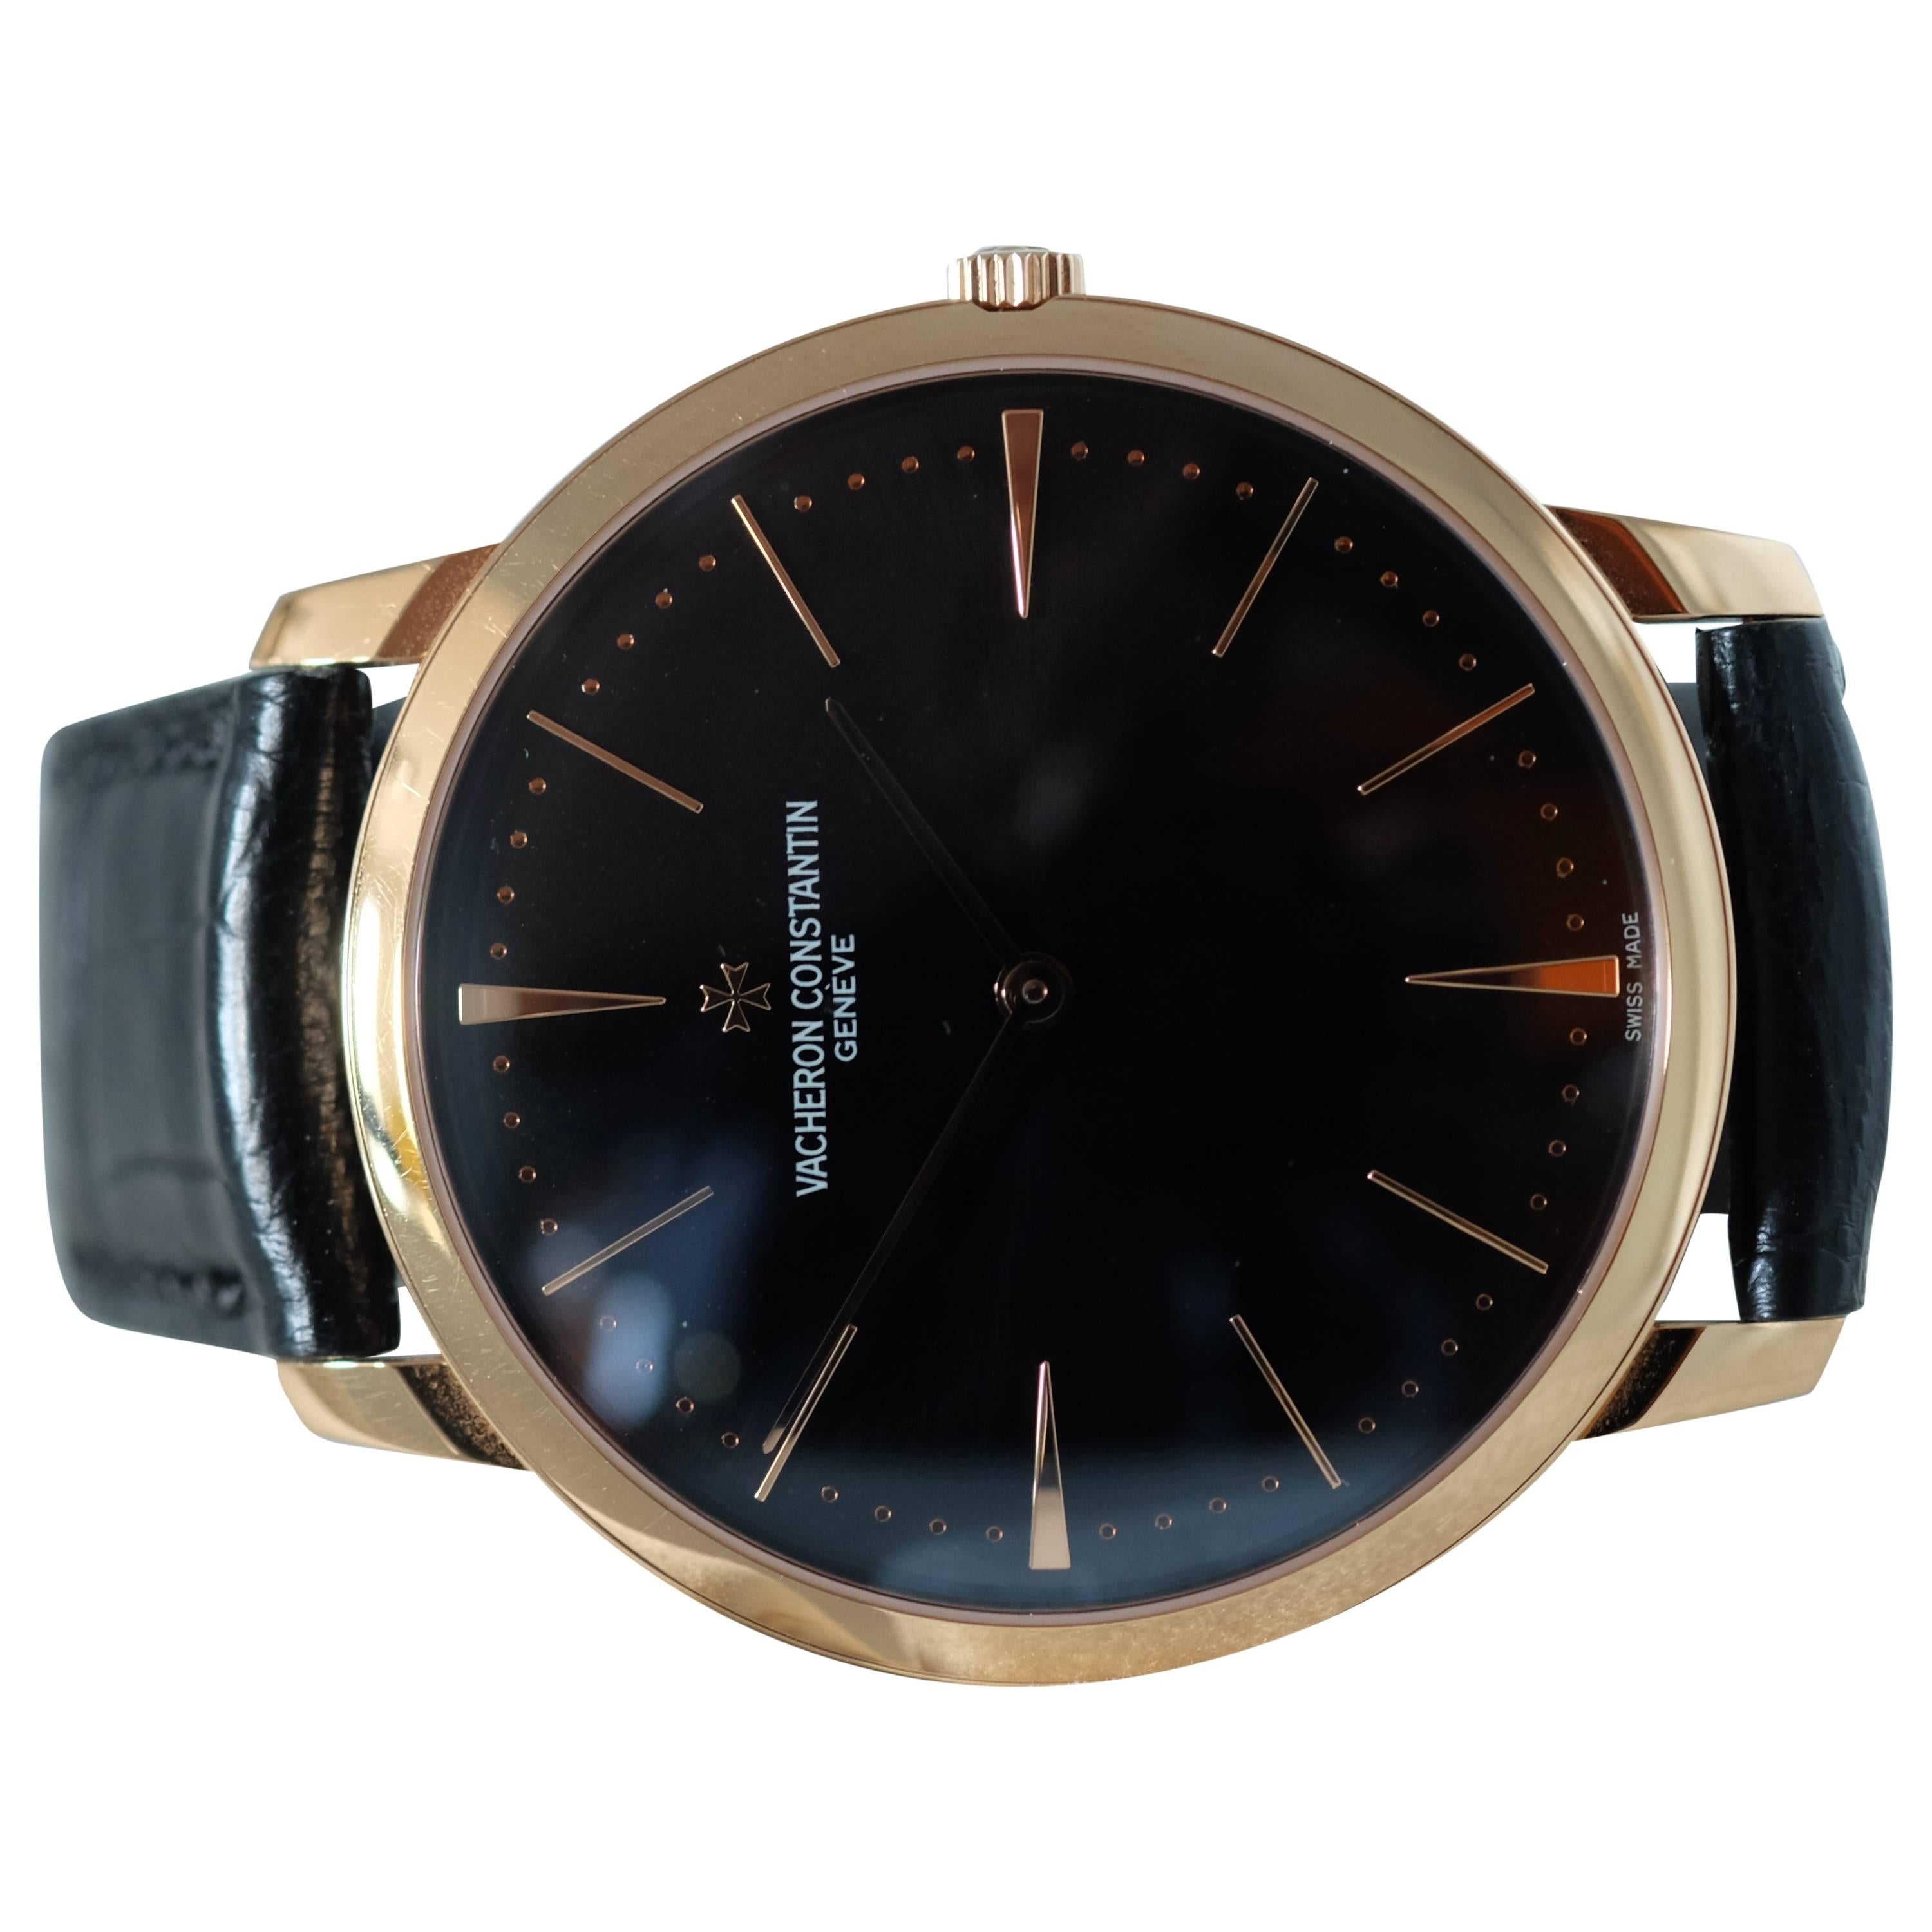 Vacheron Constantin. An 18k Pink Gold Wristwatch with Black Dial, Boutique Only

Model: Patrimony

Reference: 81180/000R-9162

Case No: 112xxxx

Cal. 1400 mechanical movement, 20 jewels, black dial, applied pink gold baton and dart numerals,